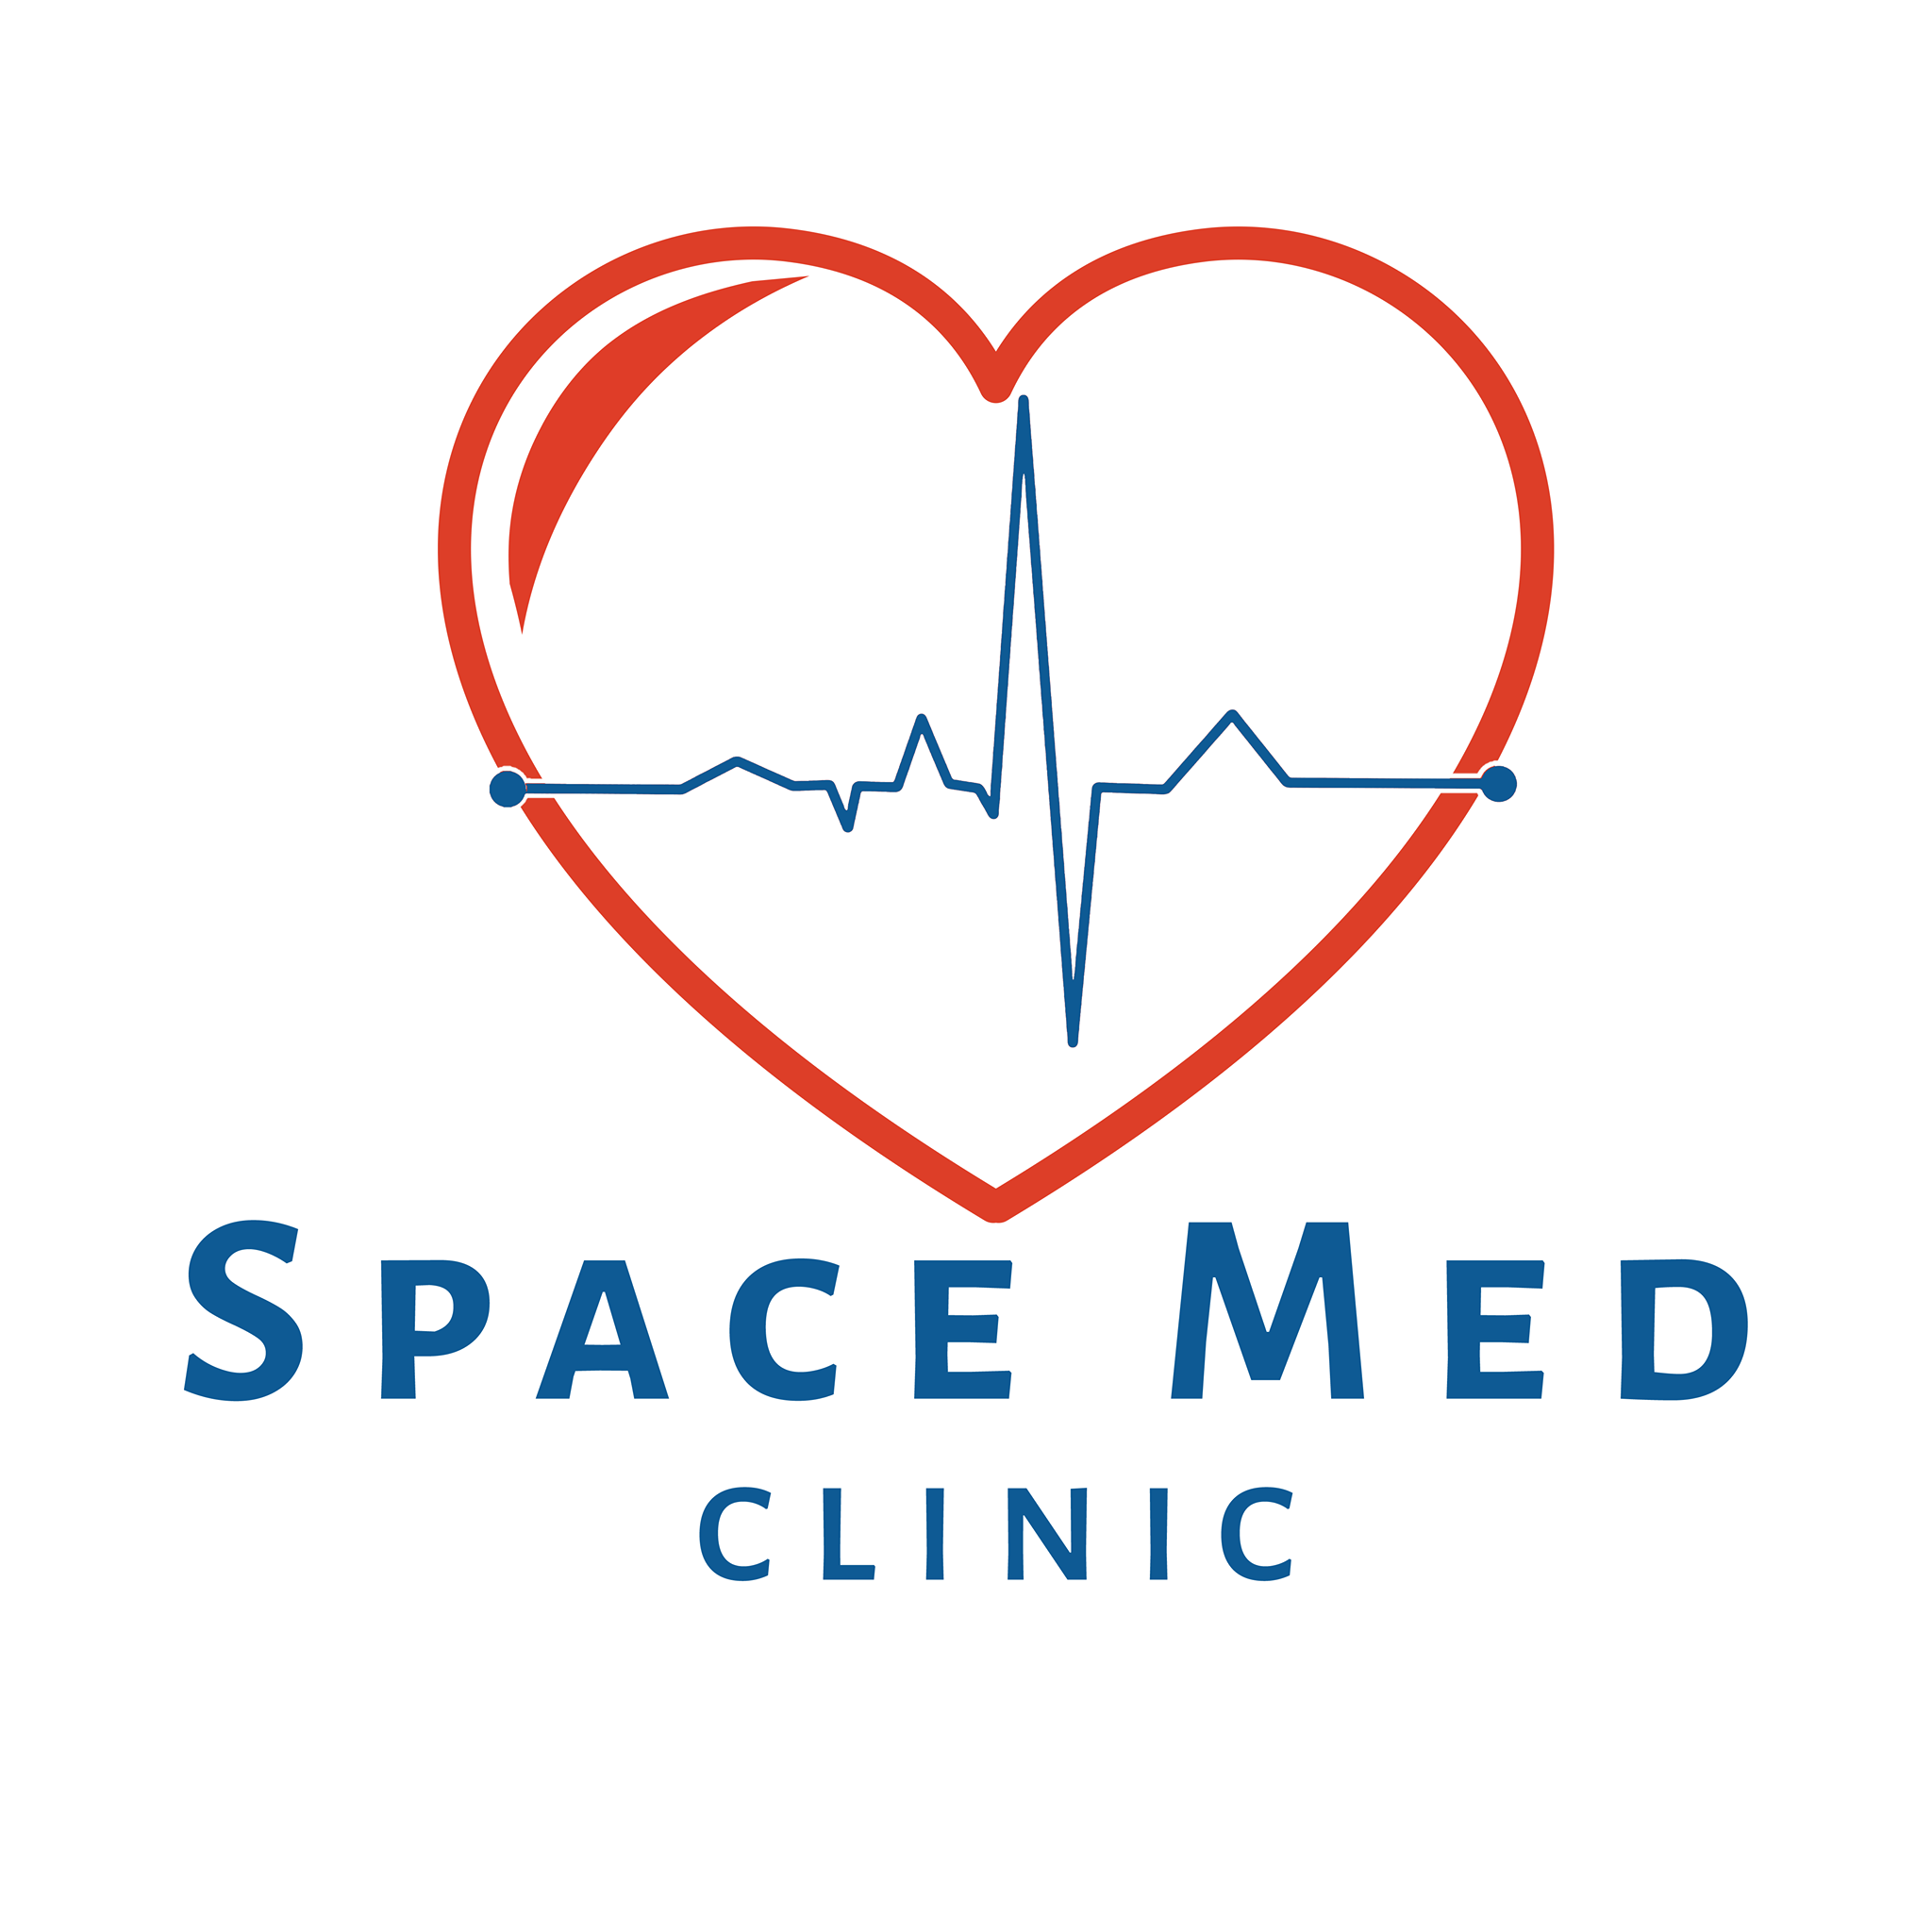 SPACE MED CLINIC